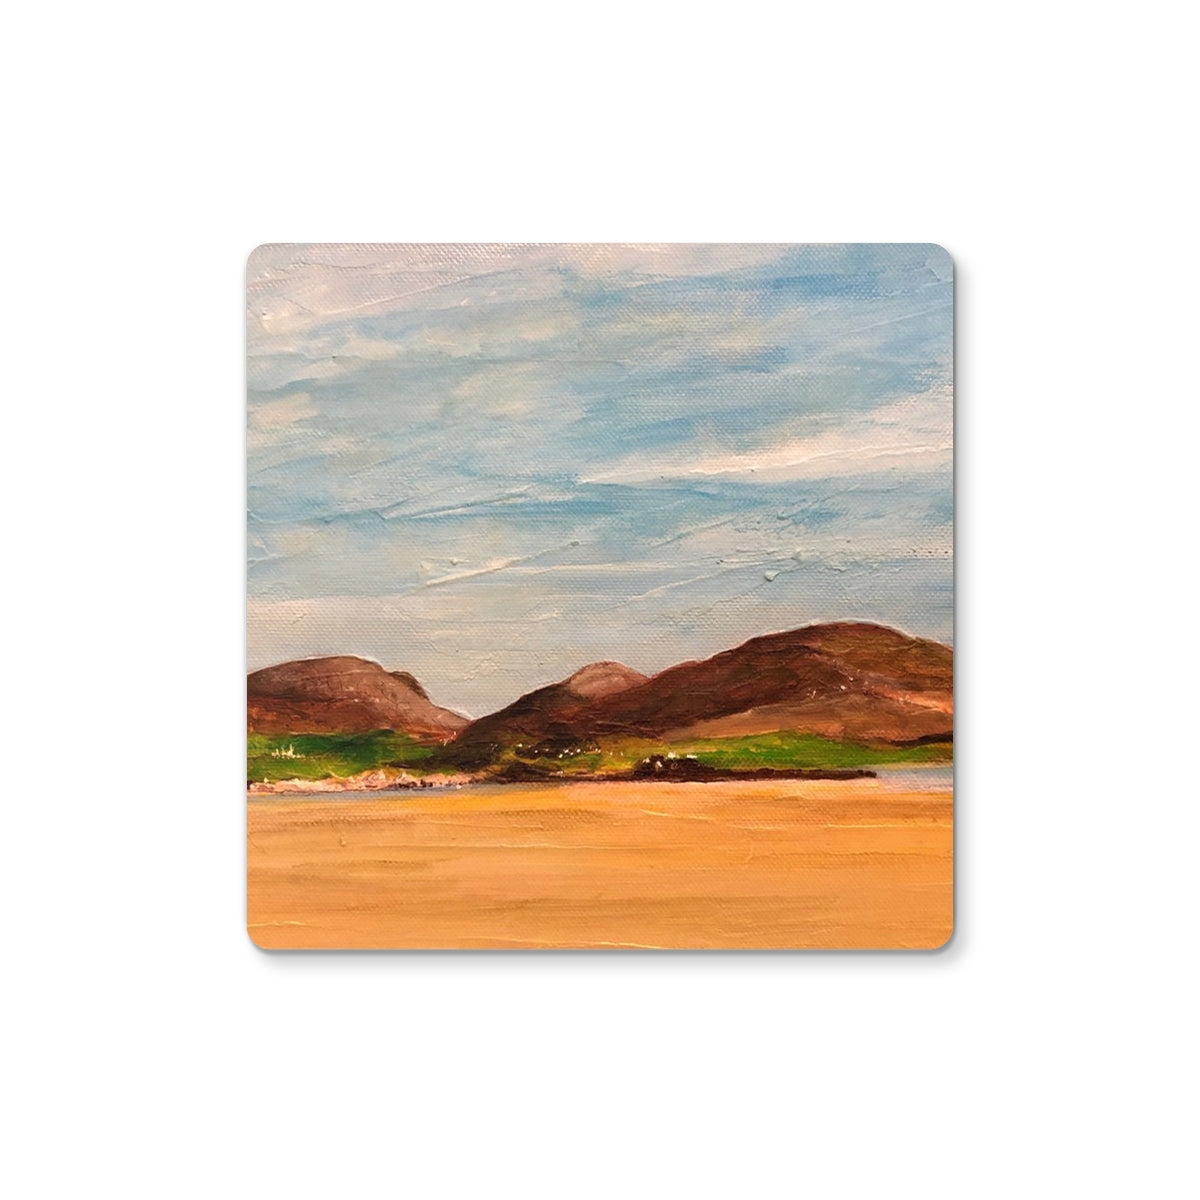 Uig Sands Lewis Art Gifts Coaster-Coasters-Hebridean Islands Art Gallery-4 Coasters-Paintings, Prints, Homeware, Art Gifts From Scotland By Scottish Artist Kevin Hunter